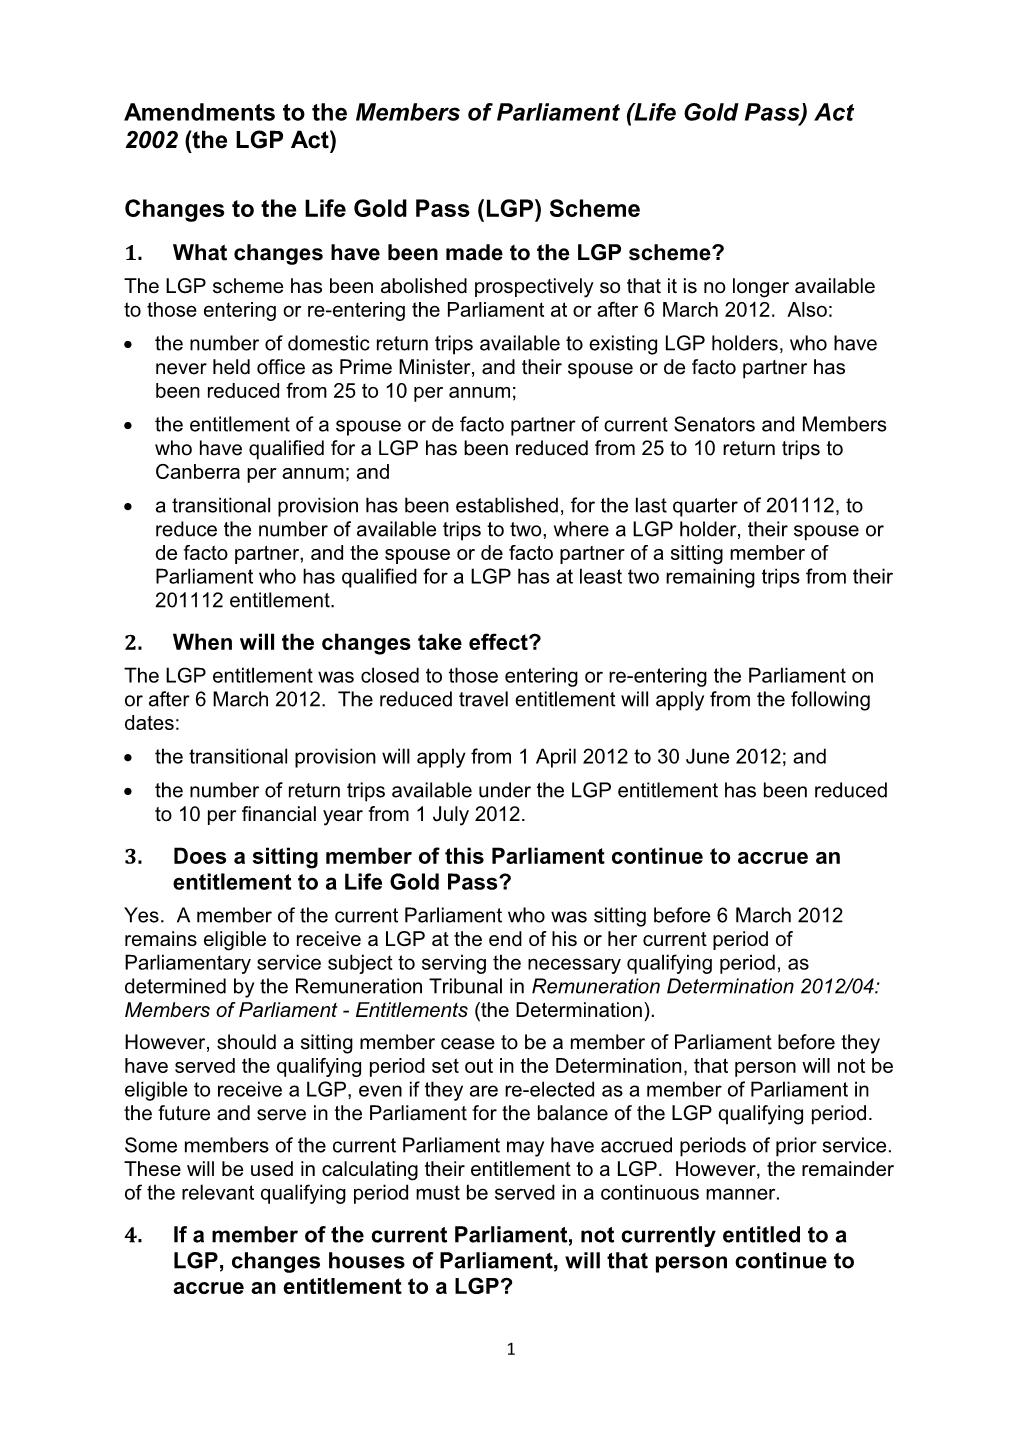 Ministerial Circular 2012/12: Life Gold Pass (LGP) Scheme - Closure of the Scheme and Reduction